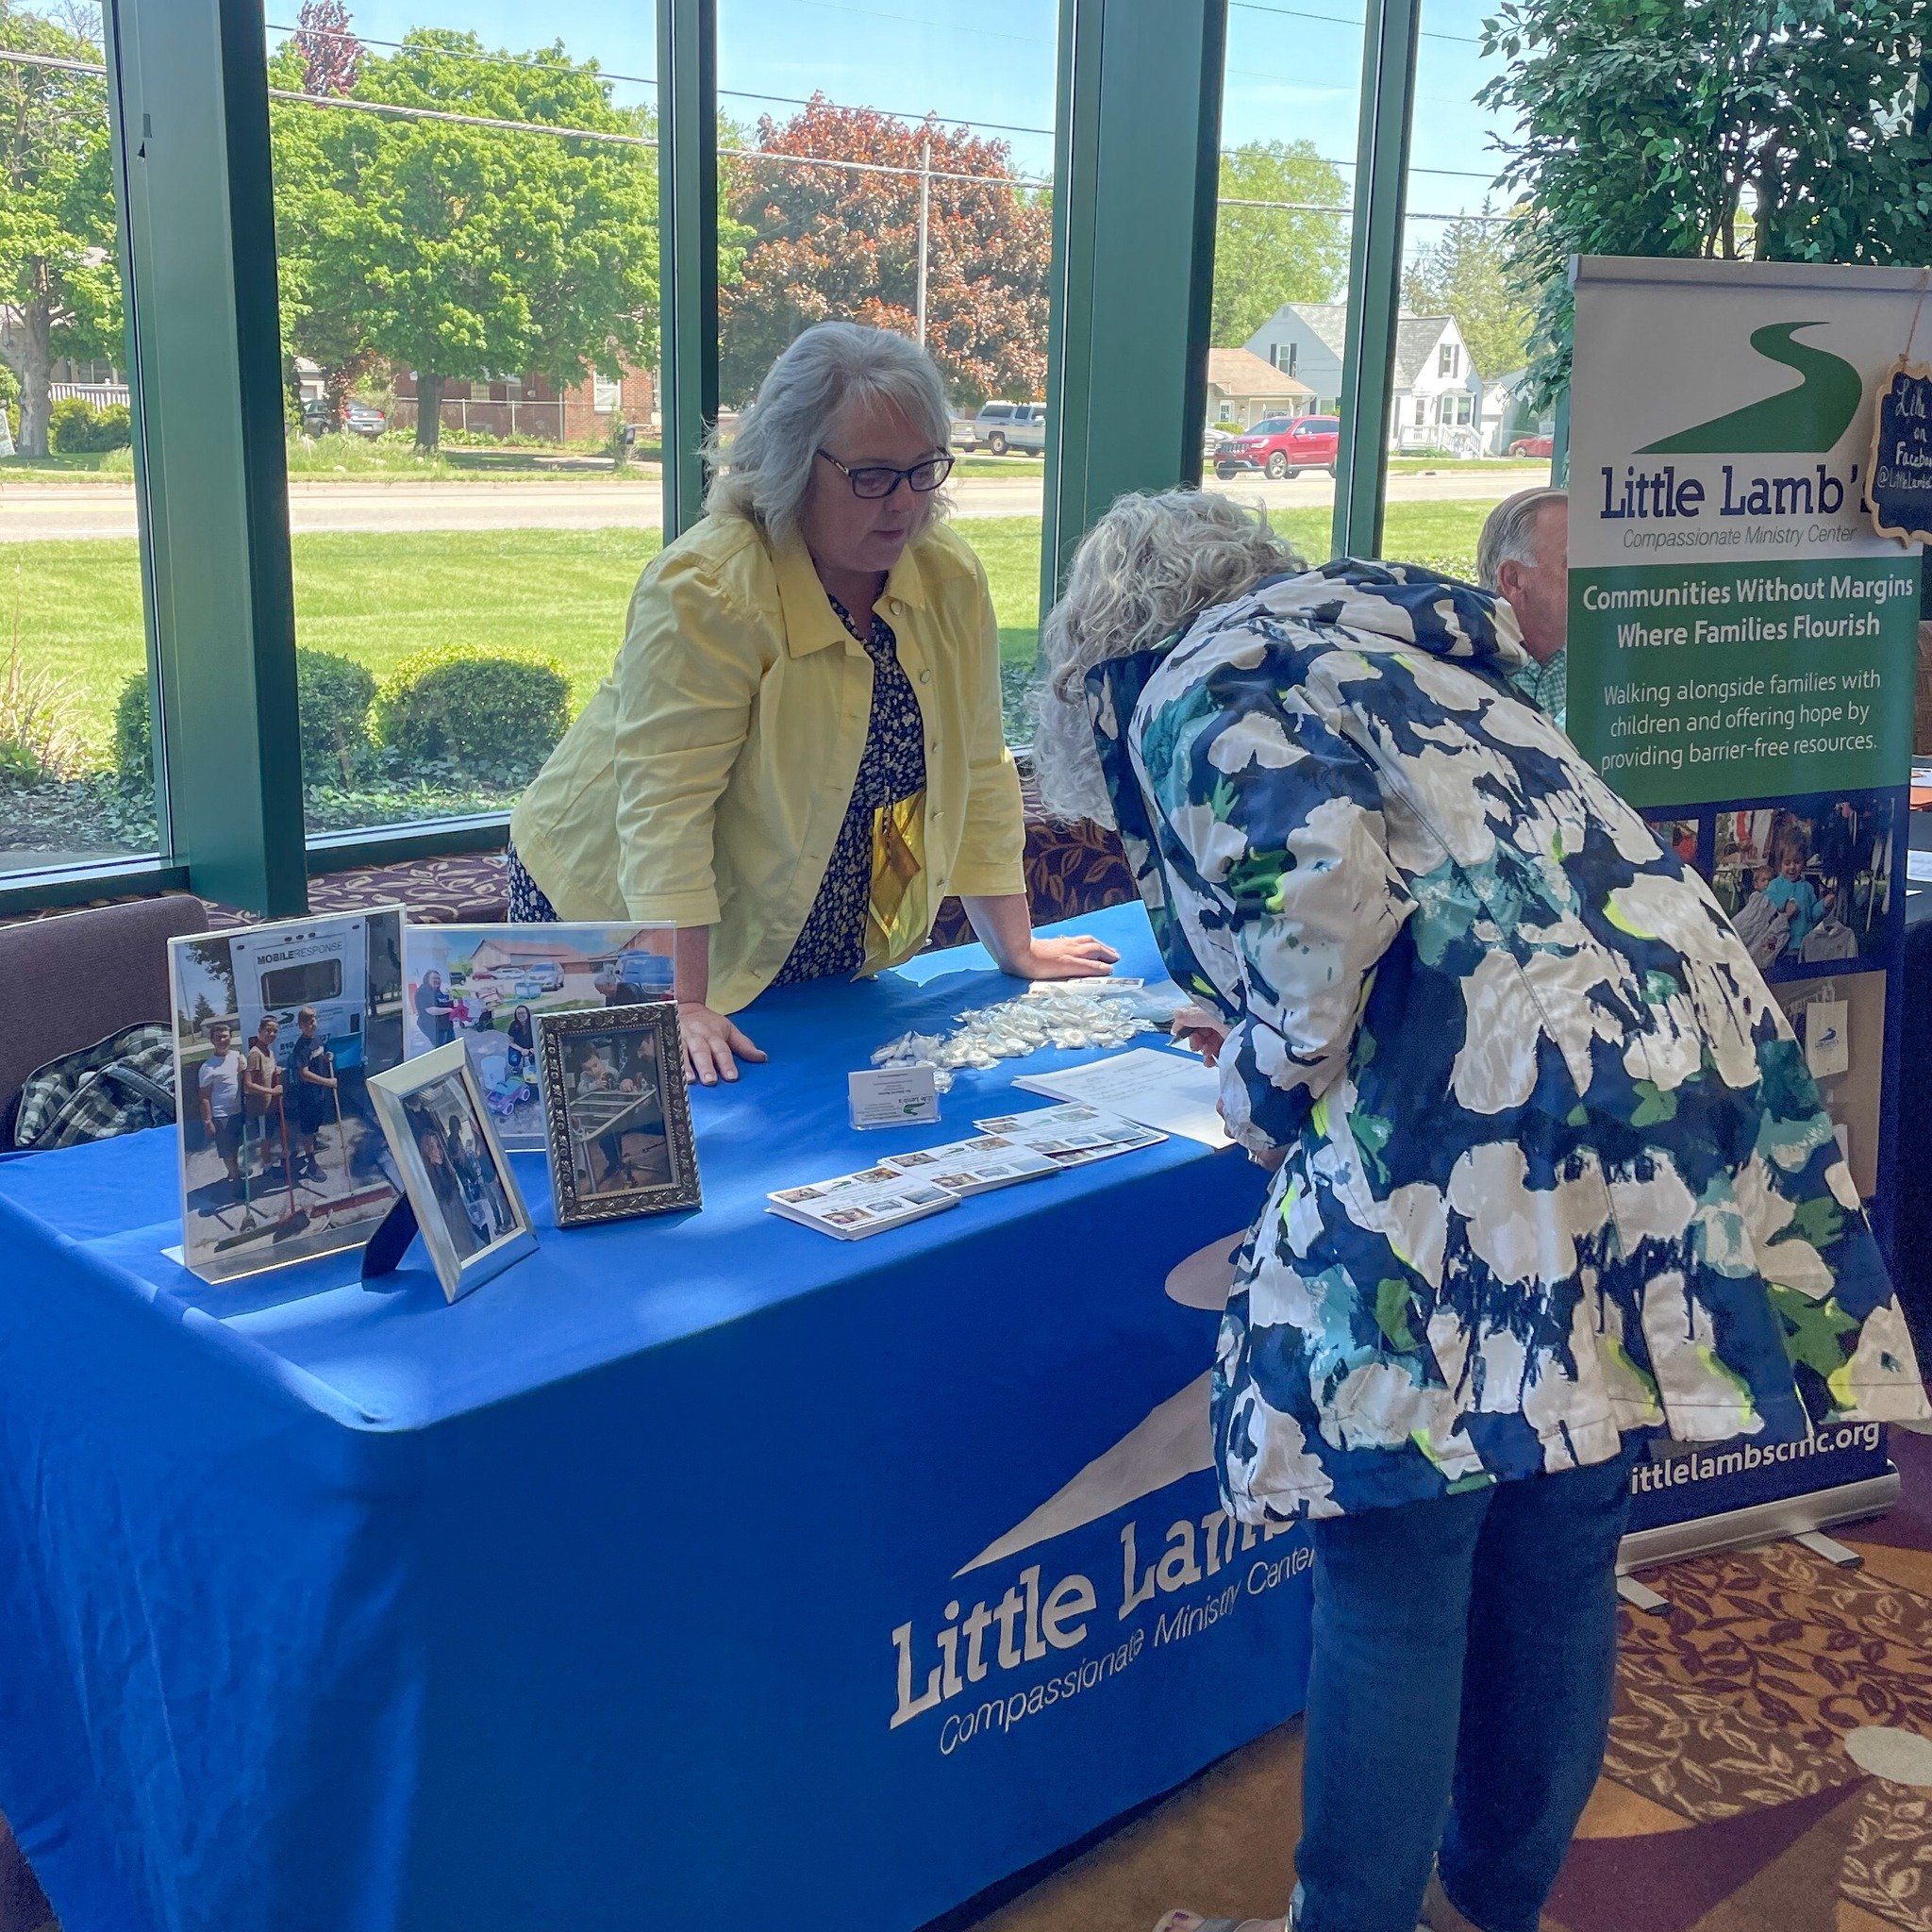 It was great to see you being the best neighbors yesterday in support of our Flint partner Little Lamb's. Their table will be in the foyer through Father's Day, so stop by in the coming weeks to sign up to volunteer, donate an item, or donate monetar